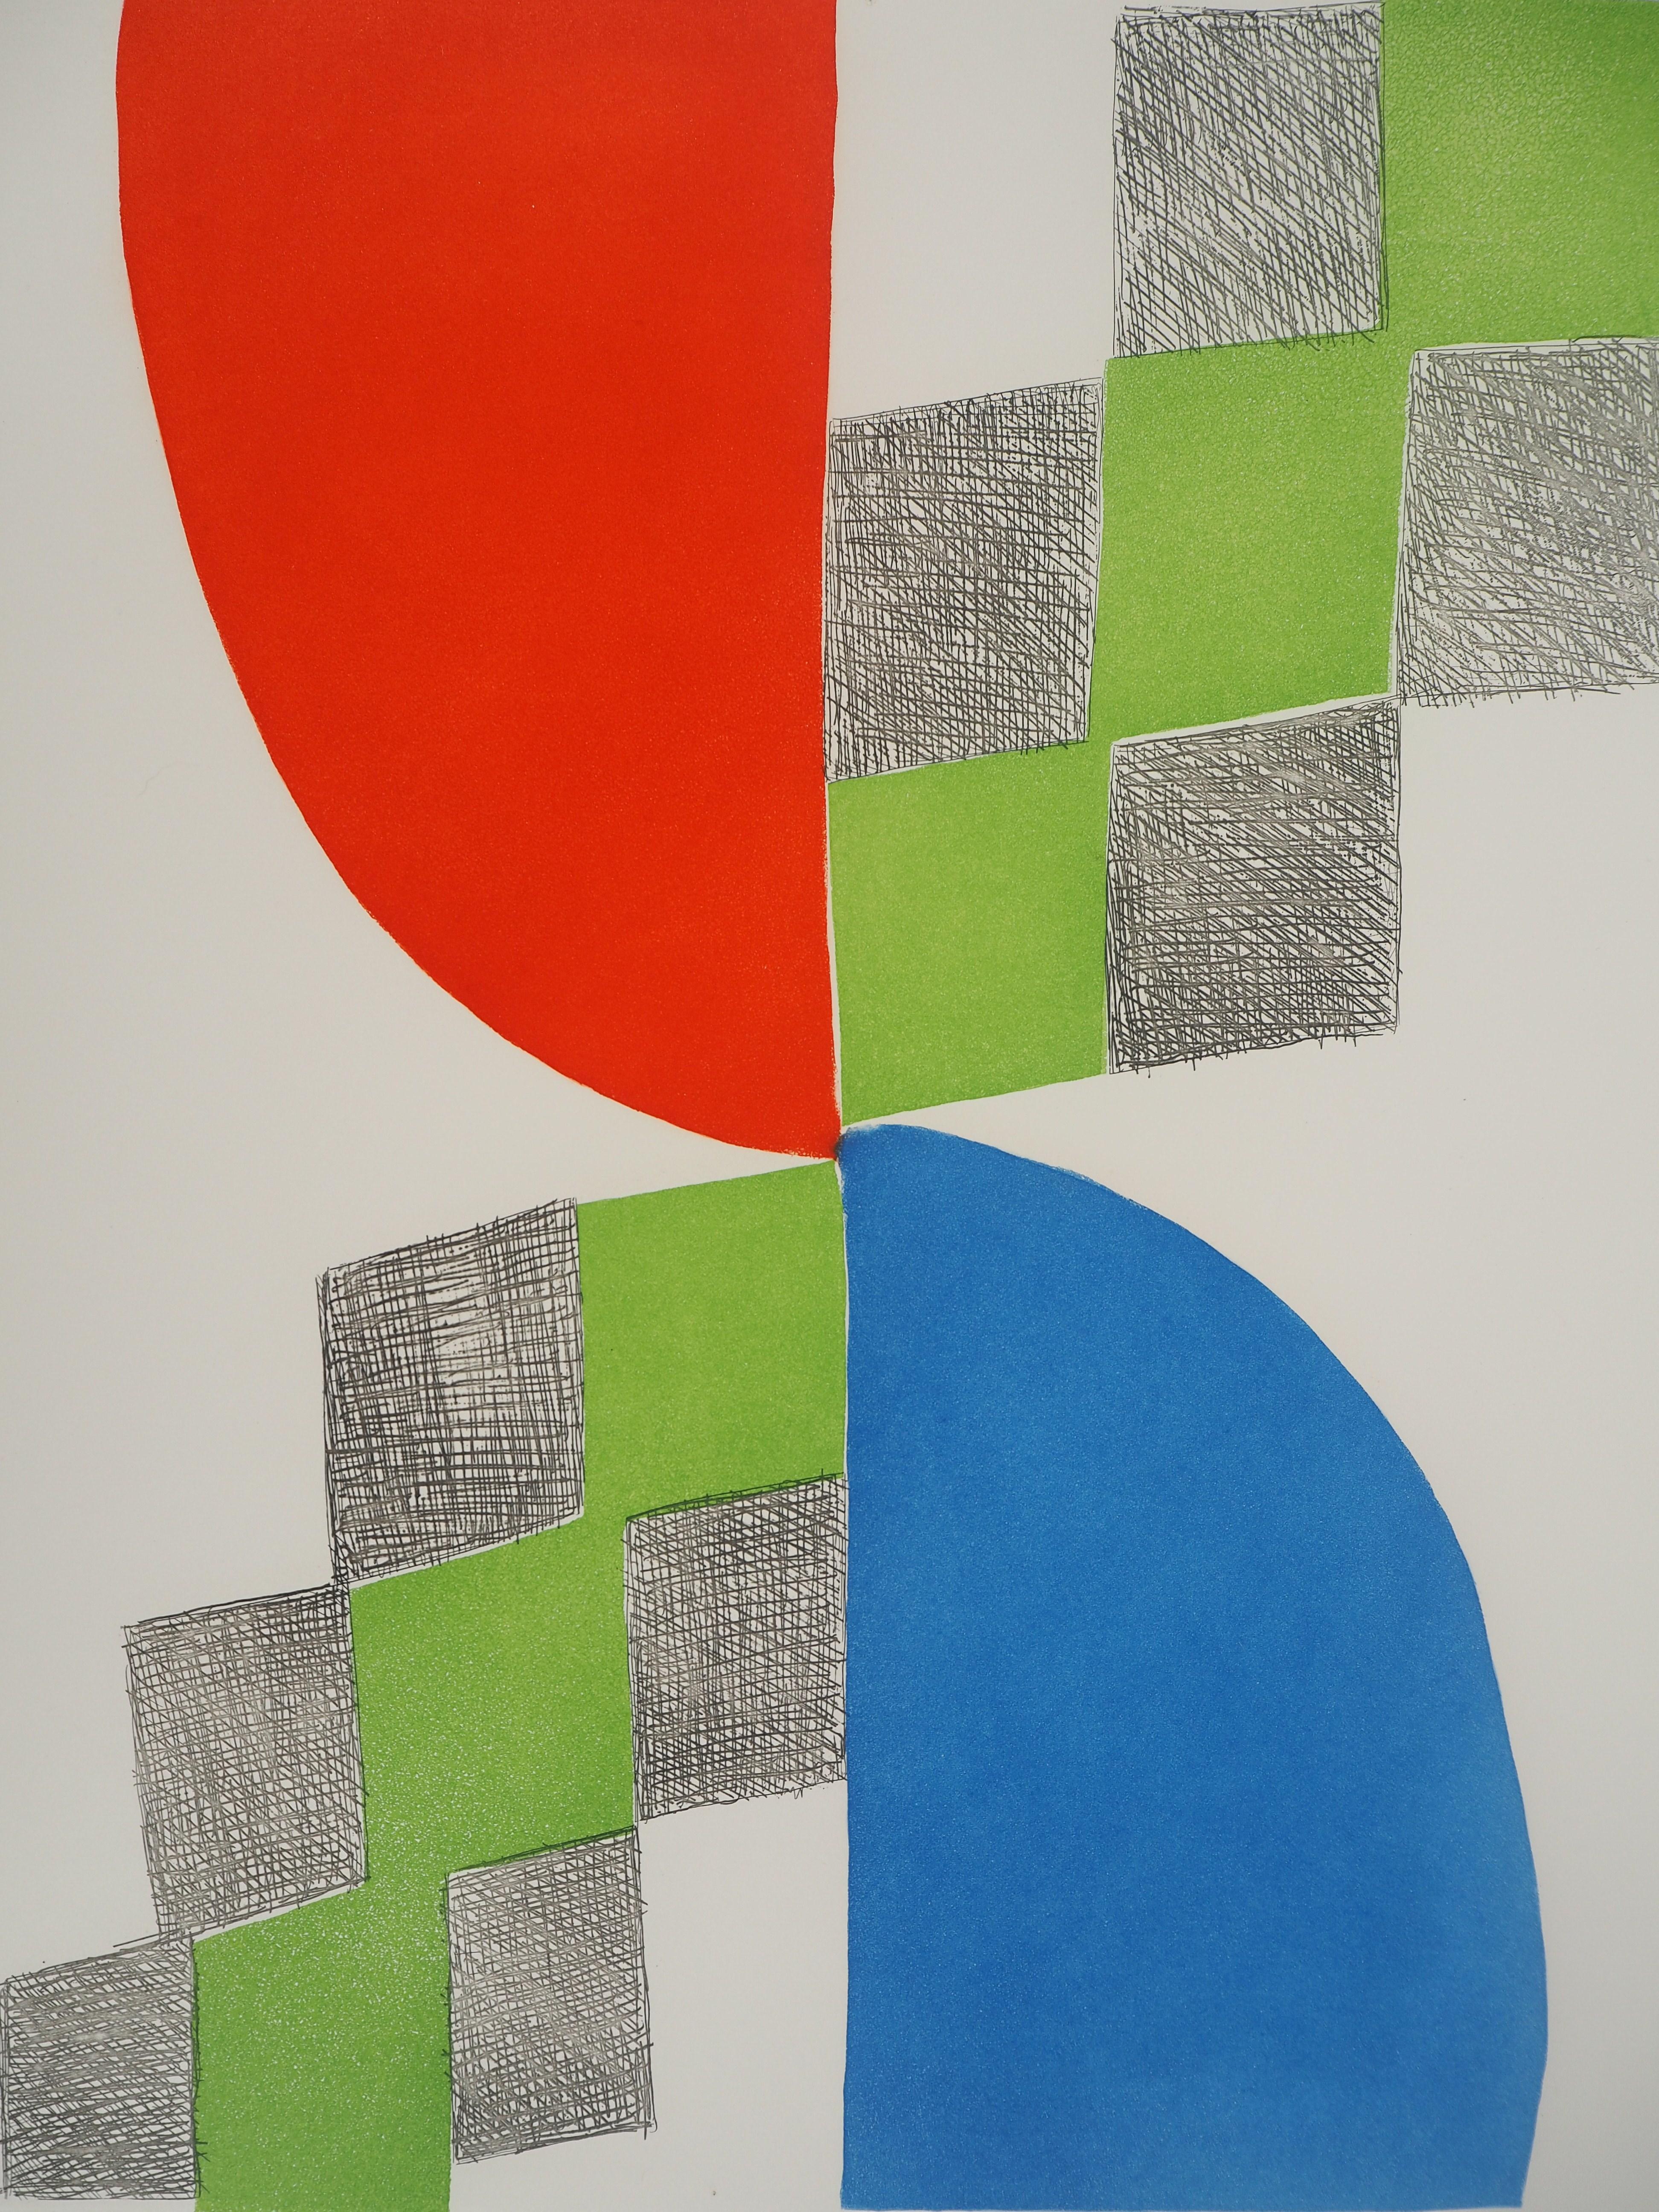 Sonia DELAUNAY
Composition 1970 

Original etching 
Signed in pencil 
Numbered / 150
On Arches vellum 65.5 x 50 cm (c. 26 x 20 in)

Excellent condition